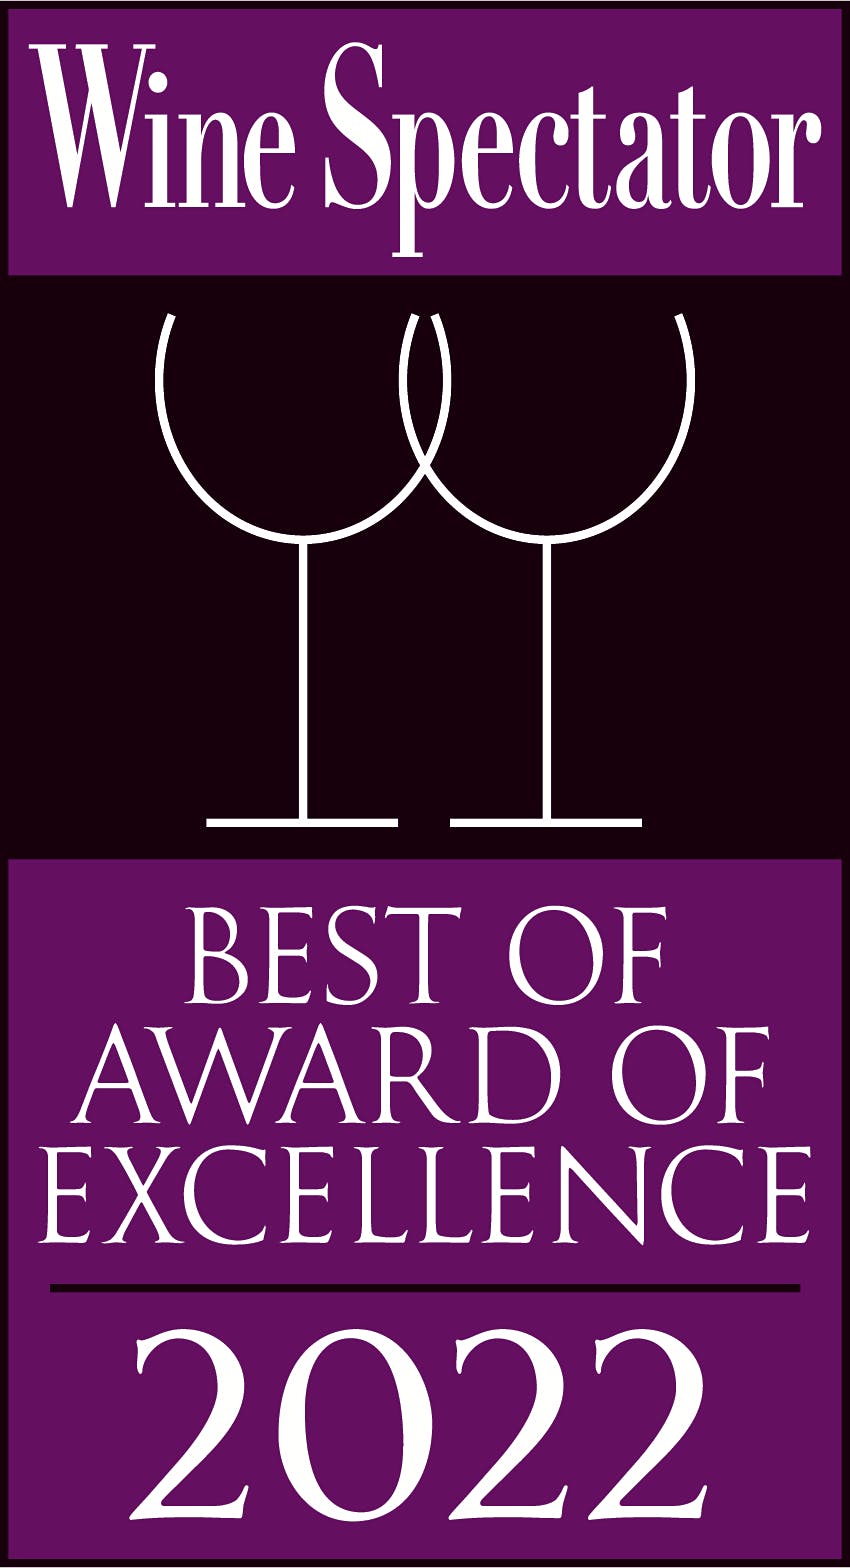 Best of Award of Excellence 2022